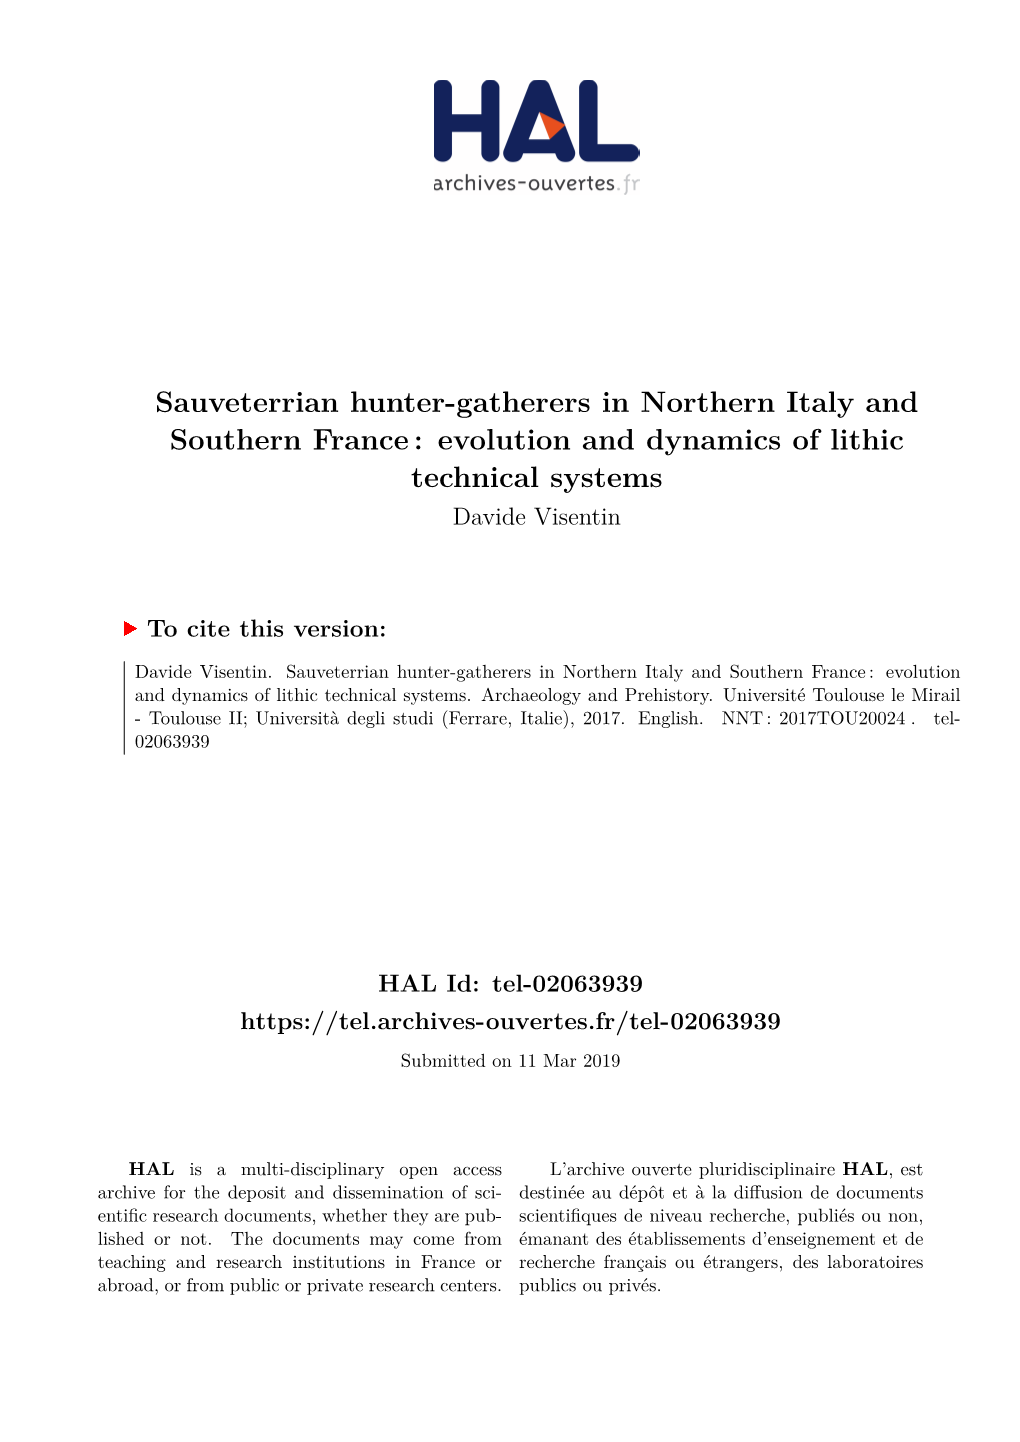 Sauveterrian Hunter-Gatherers in Northern Italy and Southern France : Evolution and Dynamics of Lithic Technical Systems Davide Visentin